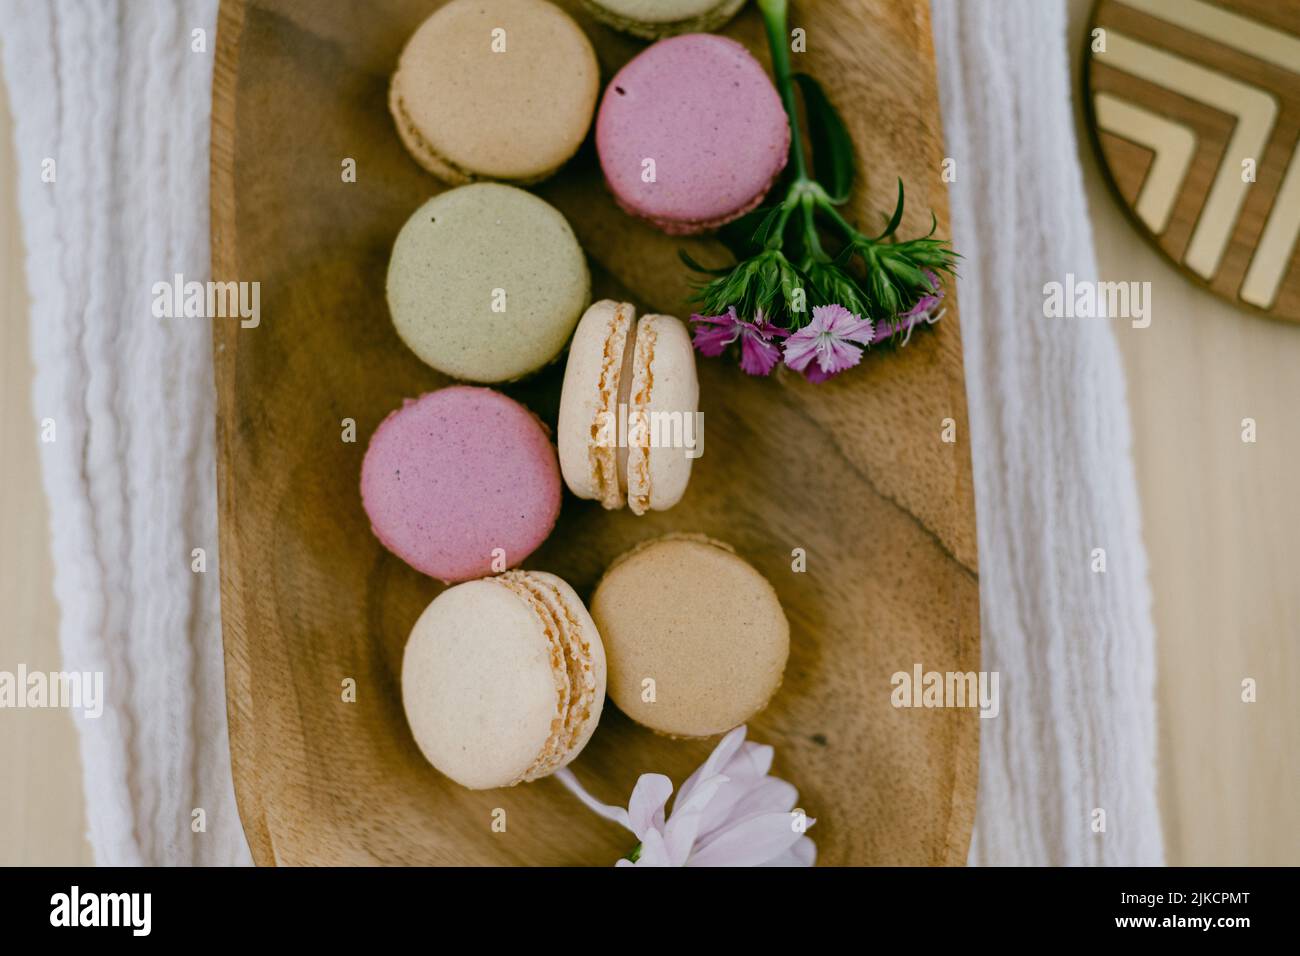 colorful macarons on a wooden plate Stock Photo